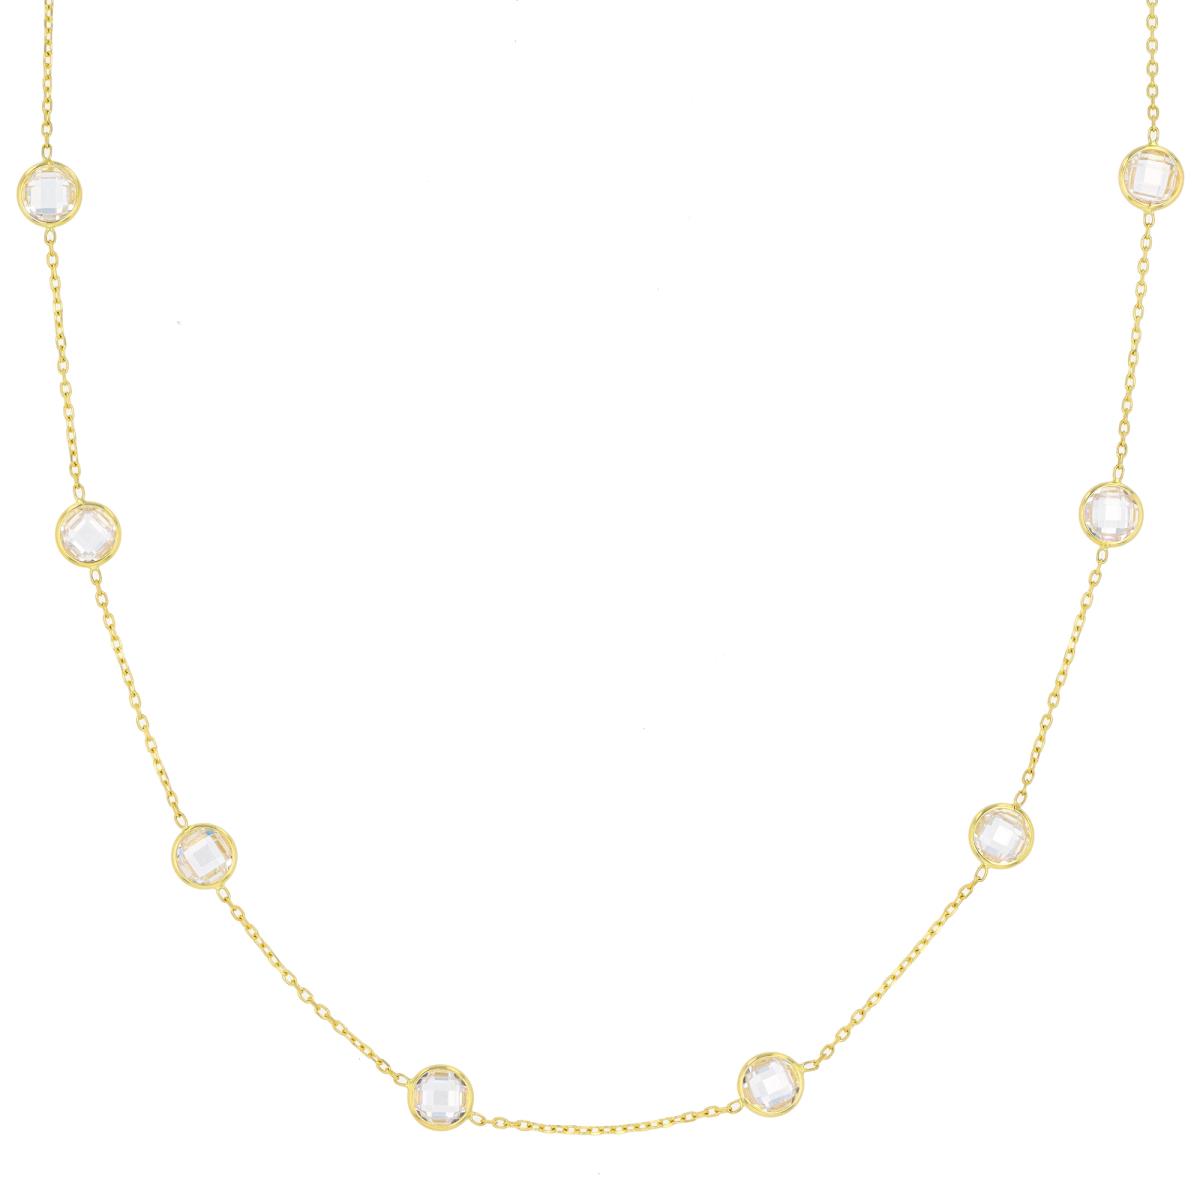 10K Yellow Gold 4mm Cabochon RD Bezel Station 16"+2" Necklace